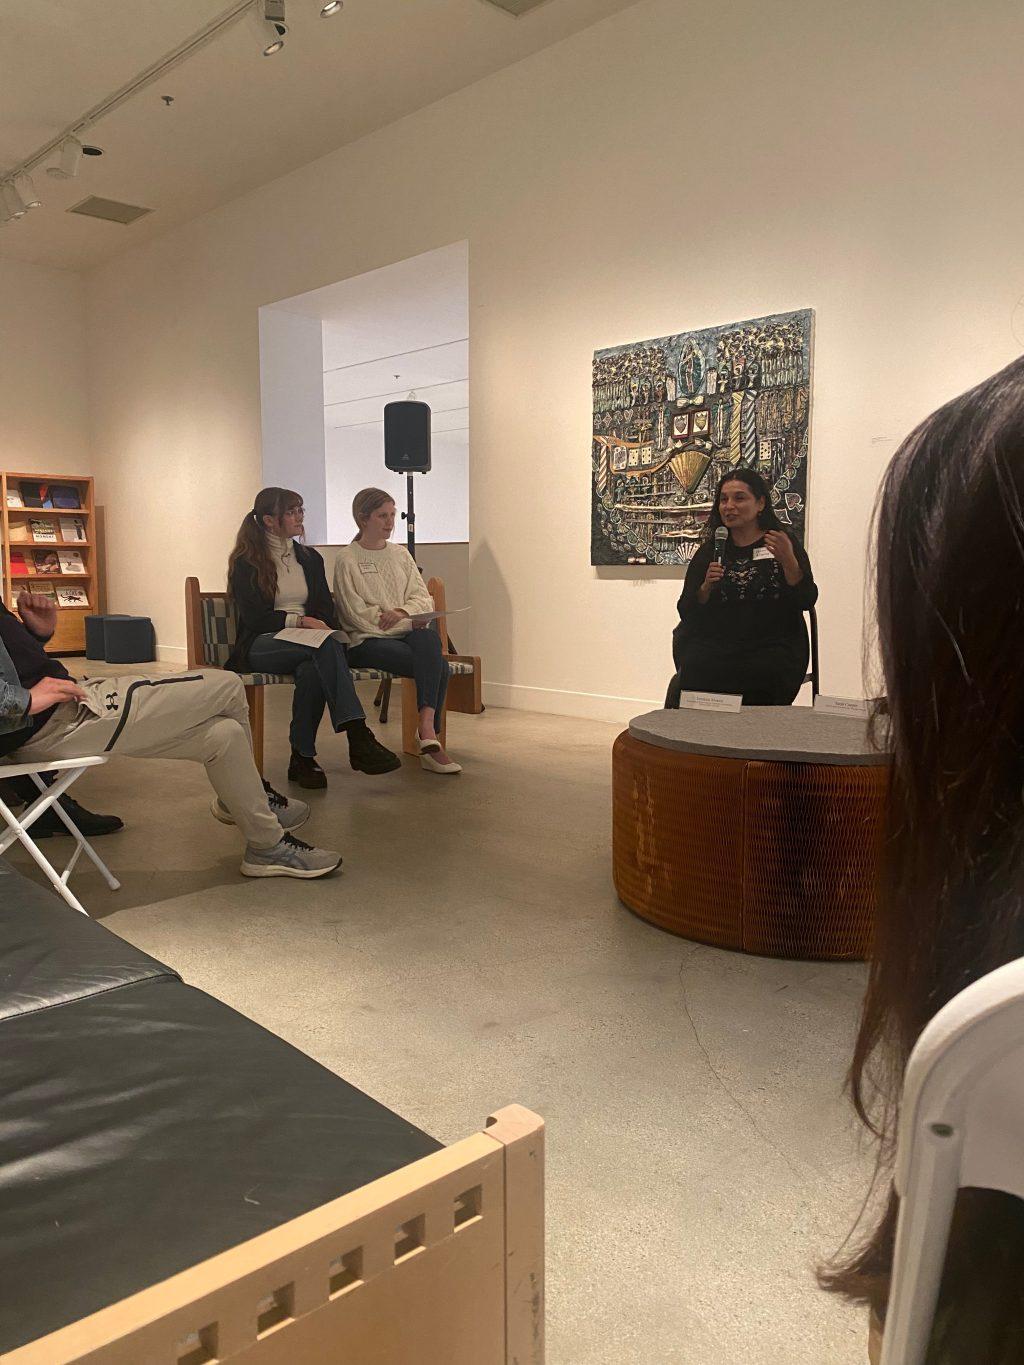 Panelist Veronica Alvarez offers students advice March 29, in the Weisman Museum. Alvarez spoke about her experiences in education and fundraising.